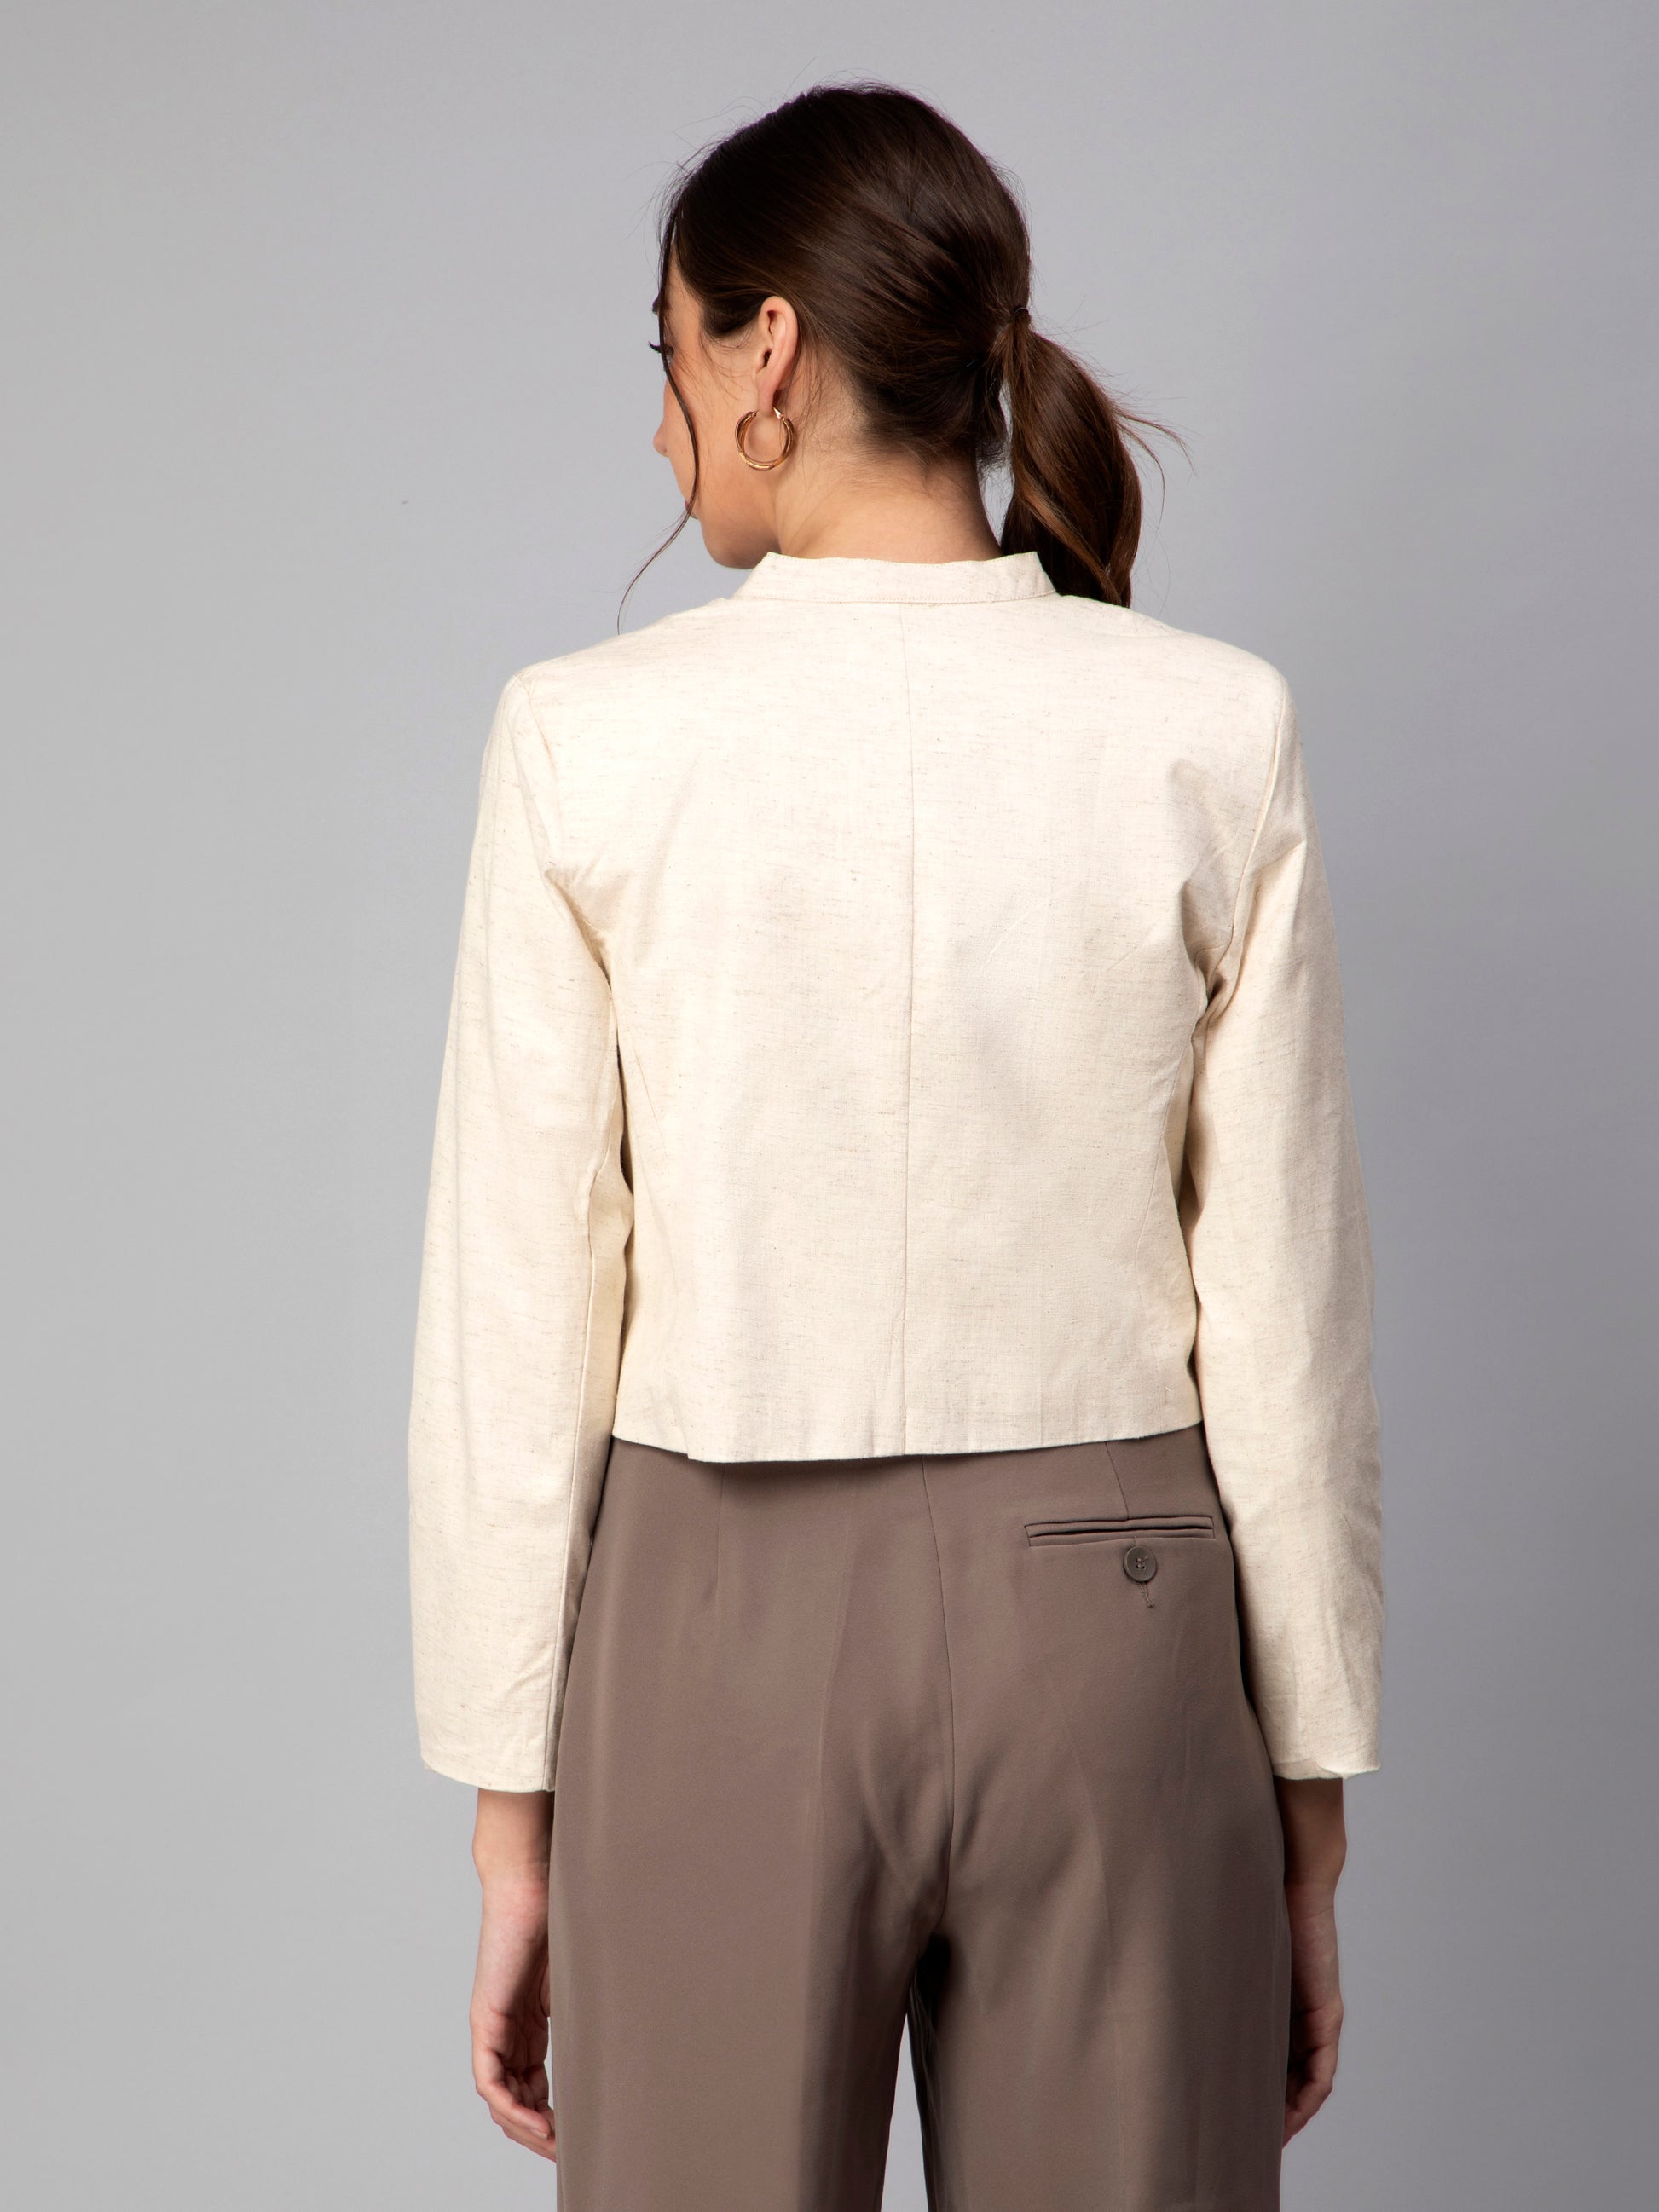 The view from back of Beige Blazer In Pure Cotton, formal office wear for women